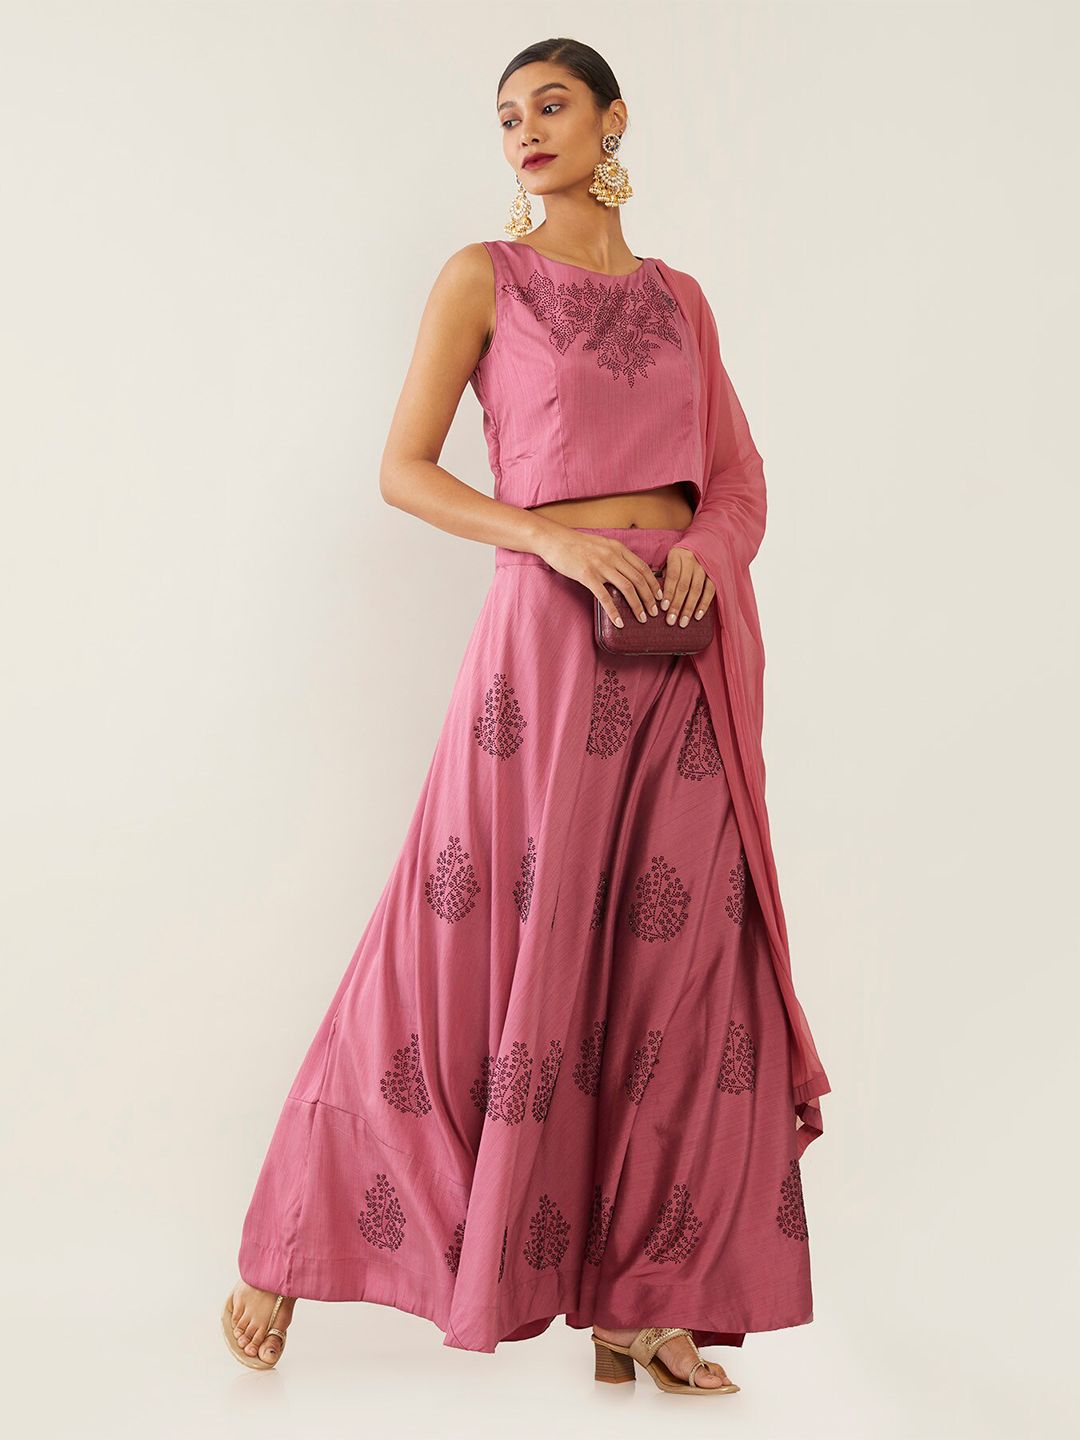 Soch Fuchsia & Black Embellished Beads and Stones Semi-Stitched Lehenga & Blouse With Dupatta Price in India